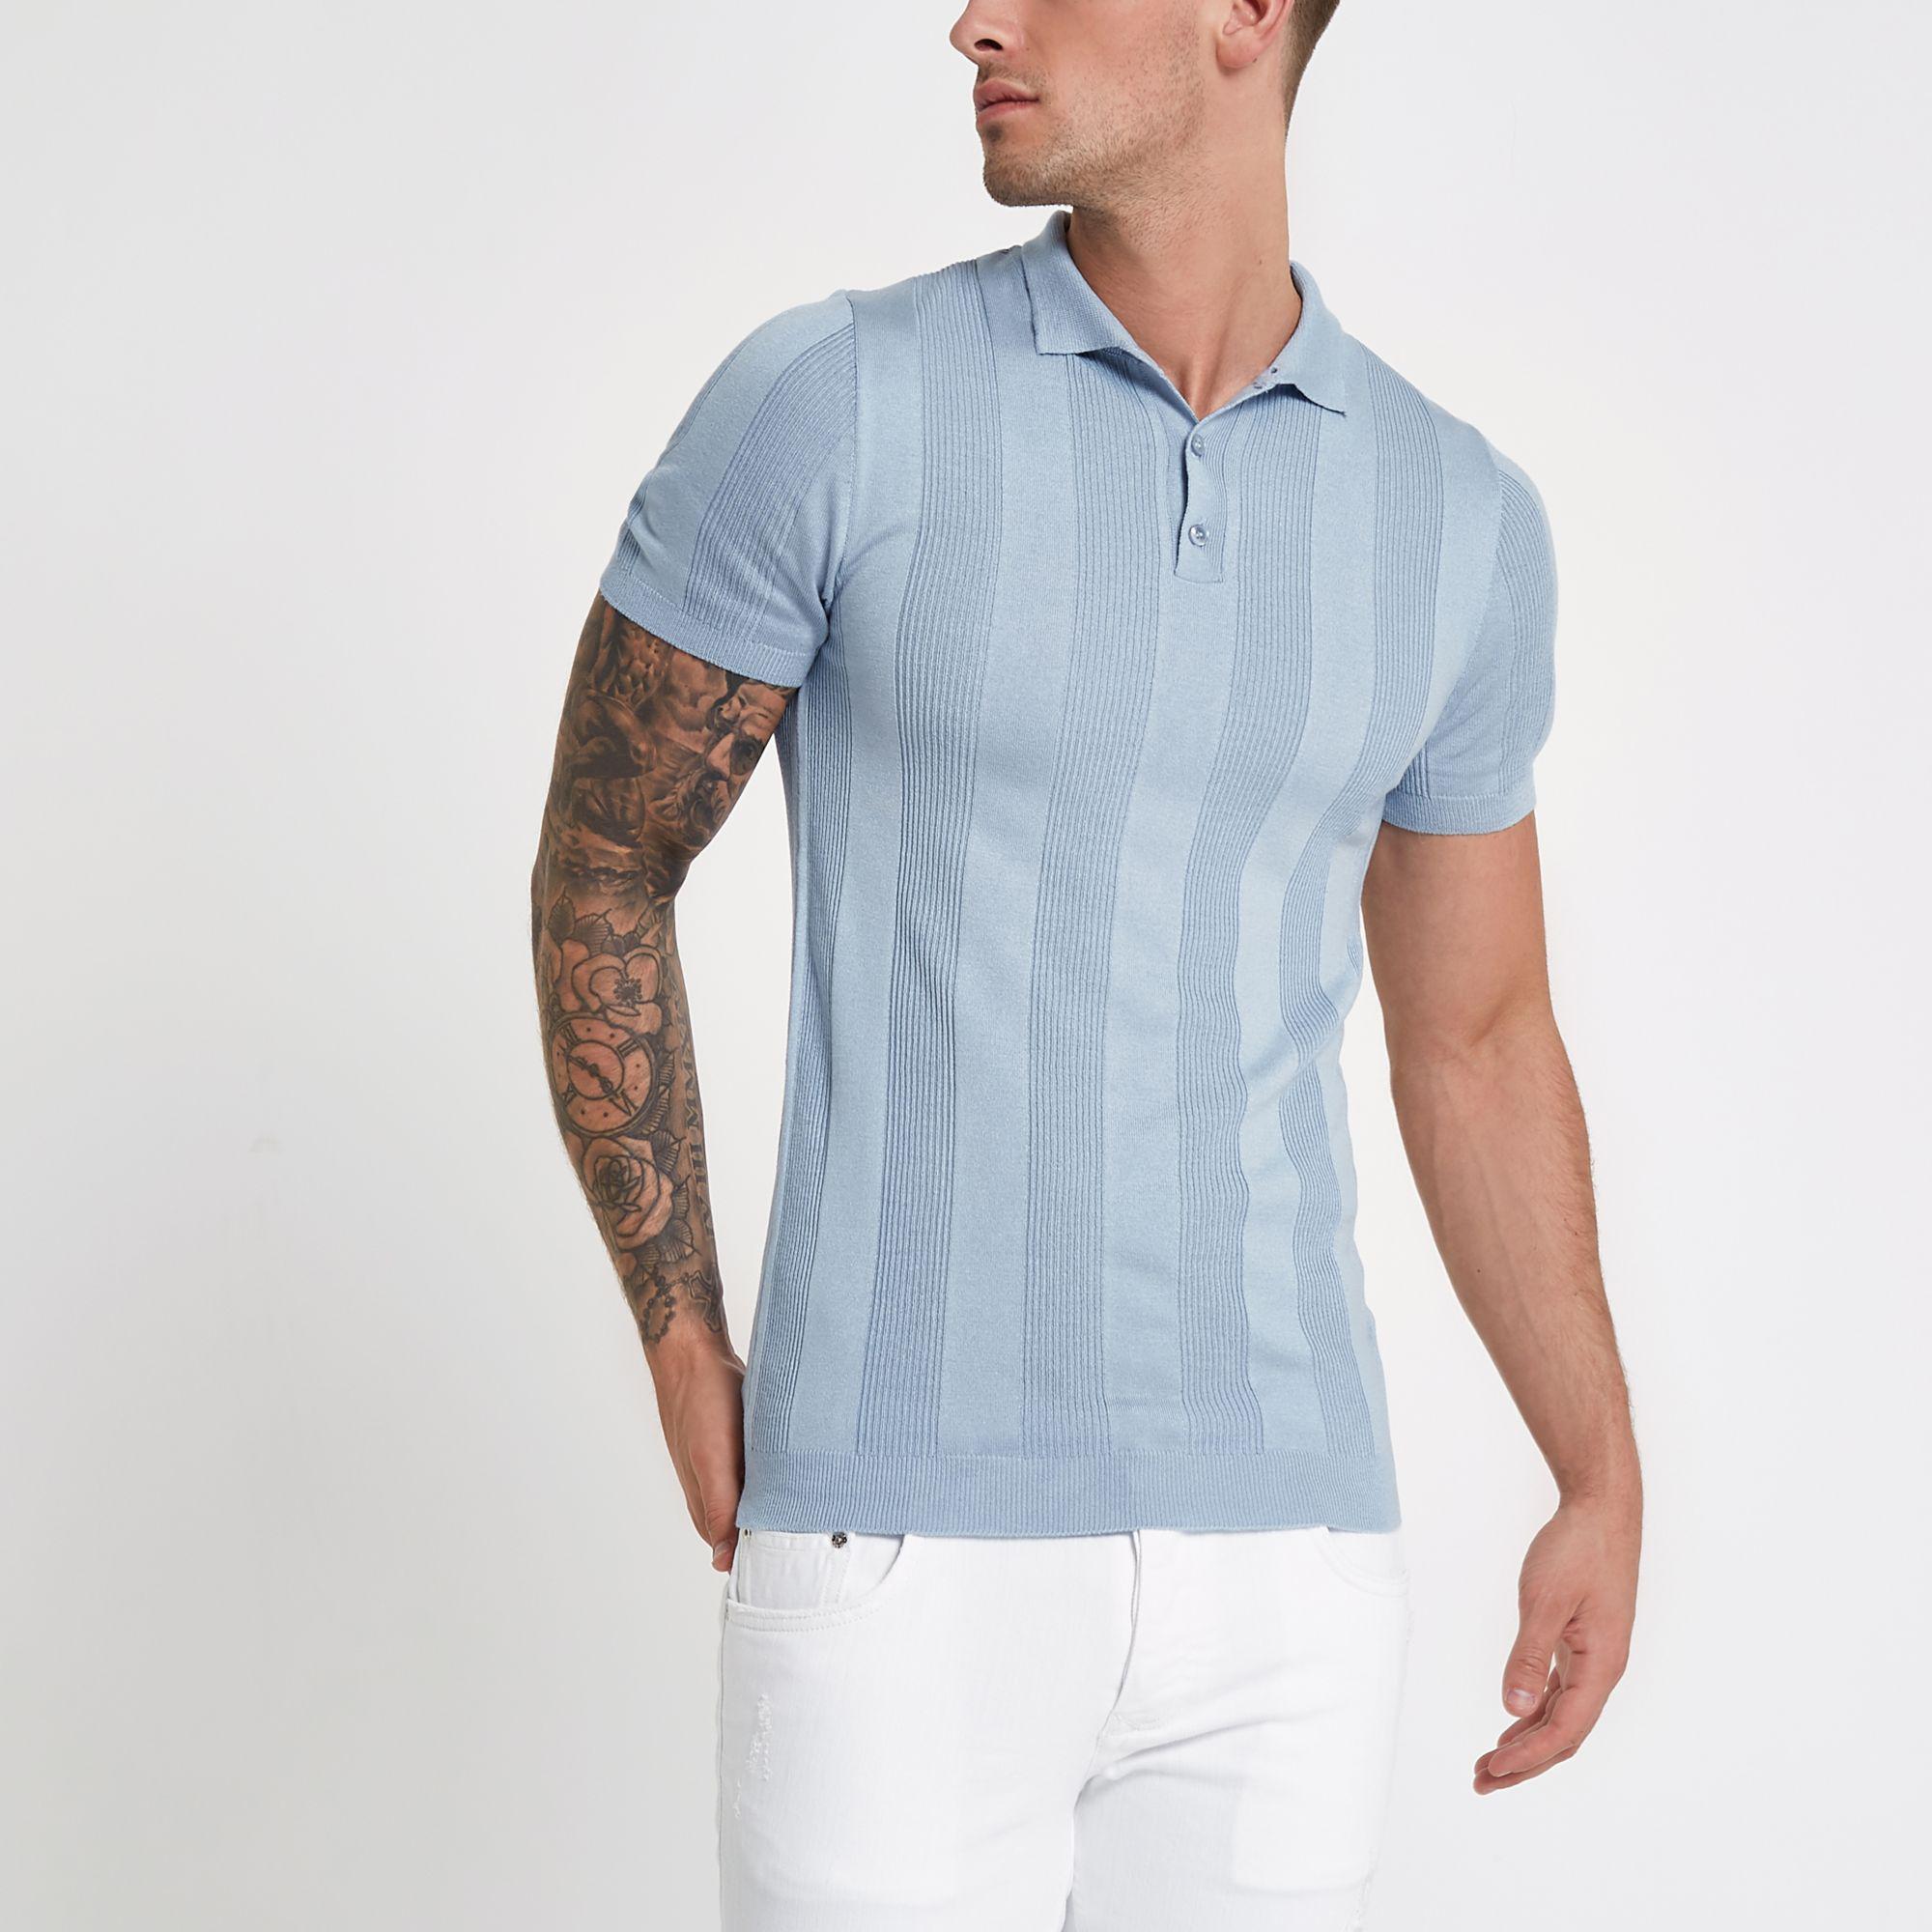 River Island Light Rib Knit Muscle Fit Polo Shirt in Blue for Men | Lyst